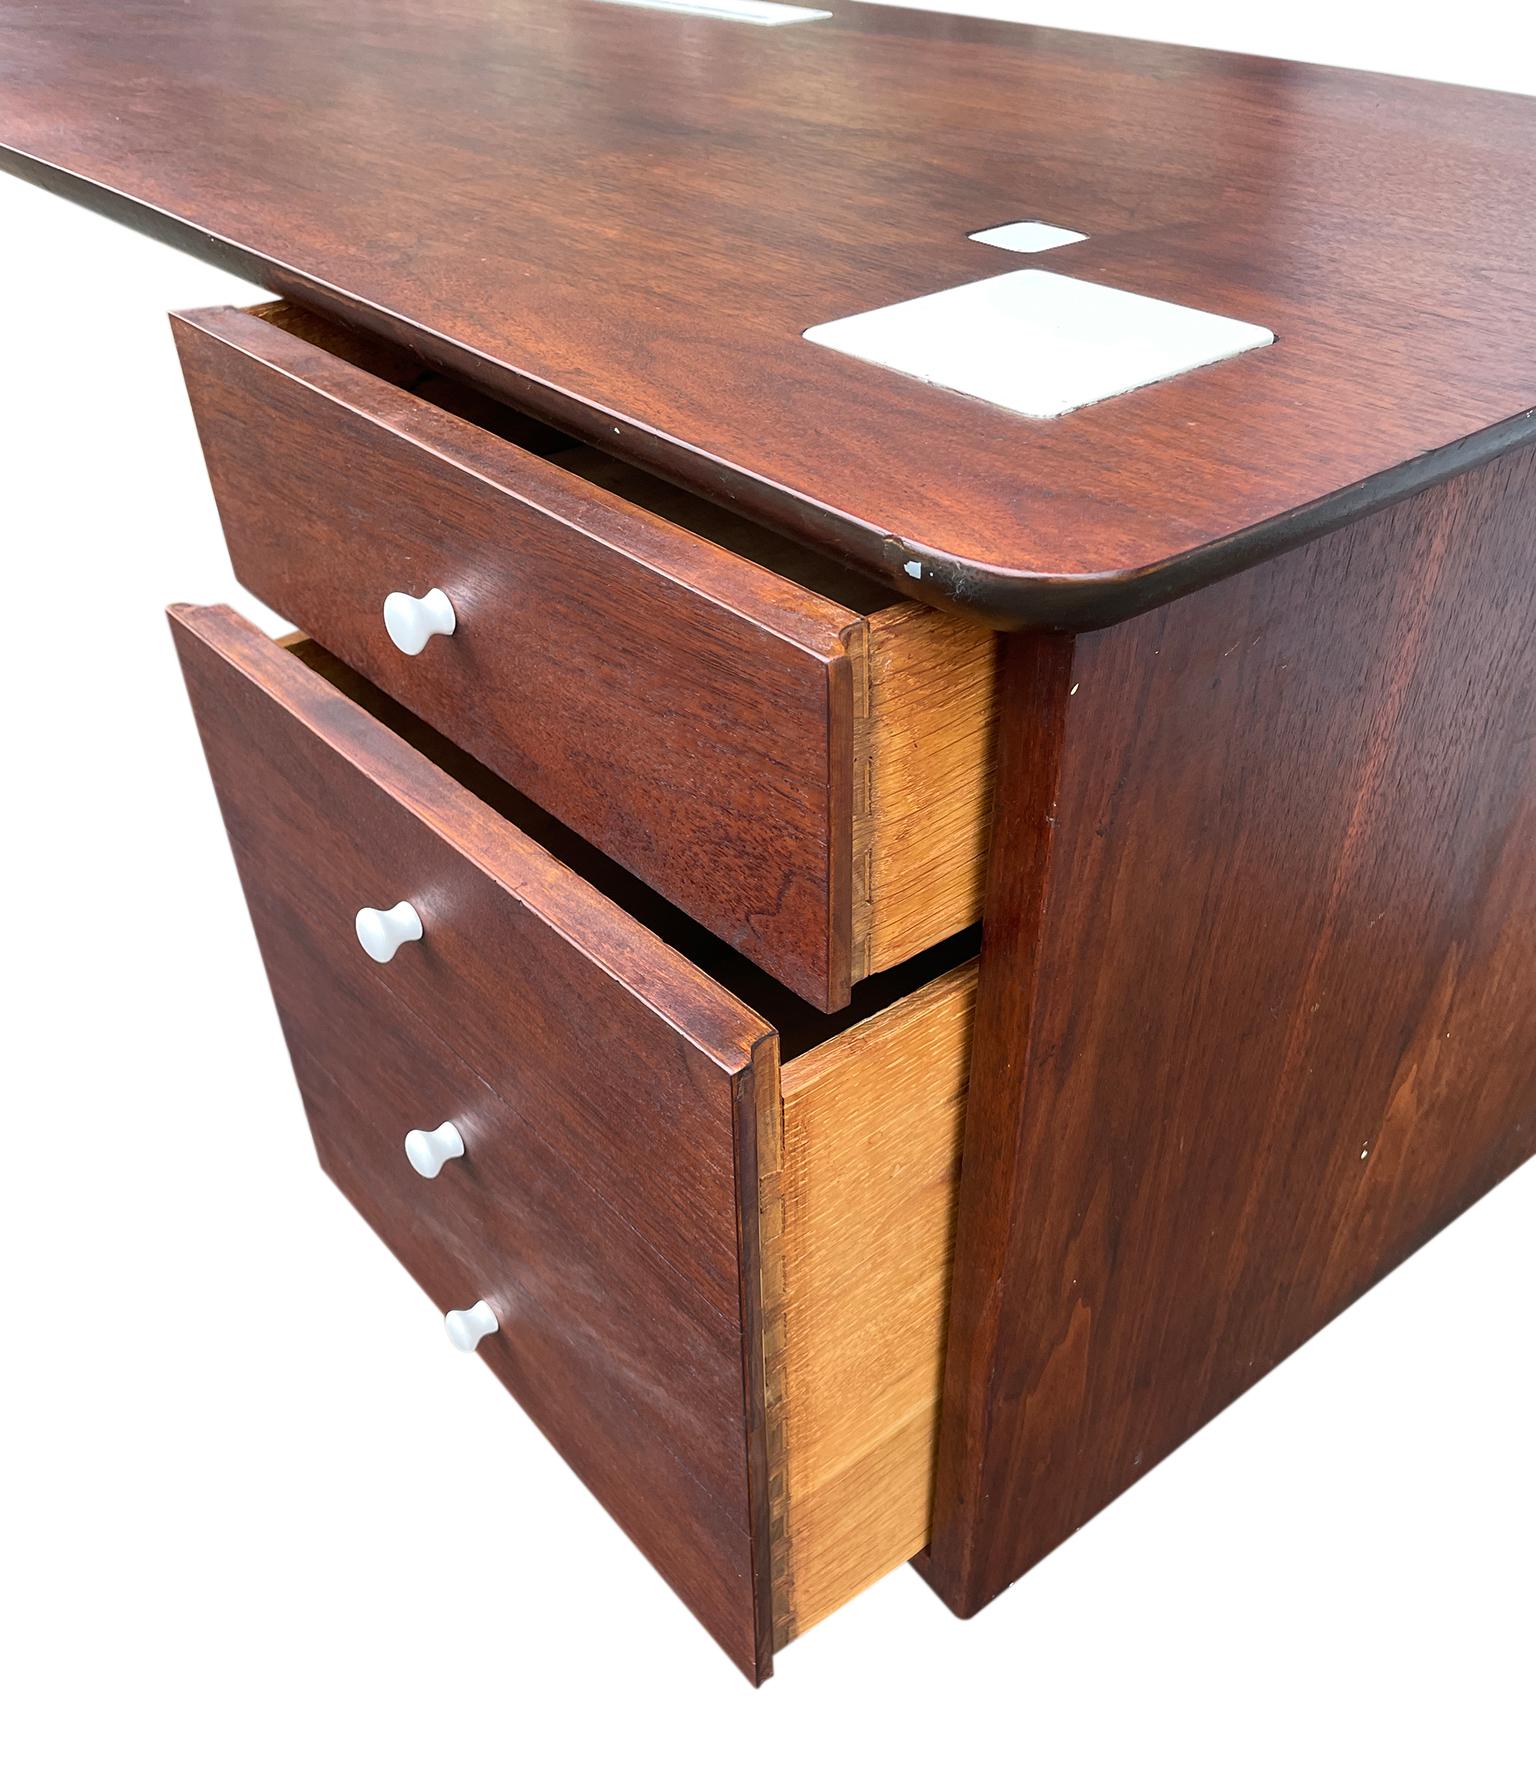 Mid-20th Century Mid-Century Modern Walnut Curved Top Desk with 2 Drawers Ceramic Tiles & Knobs